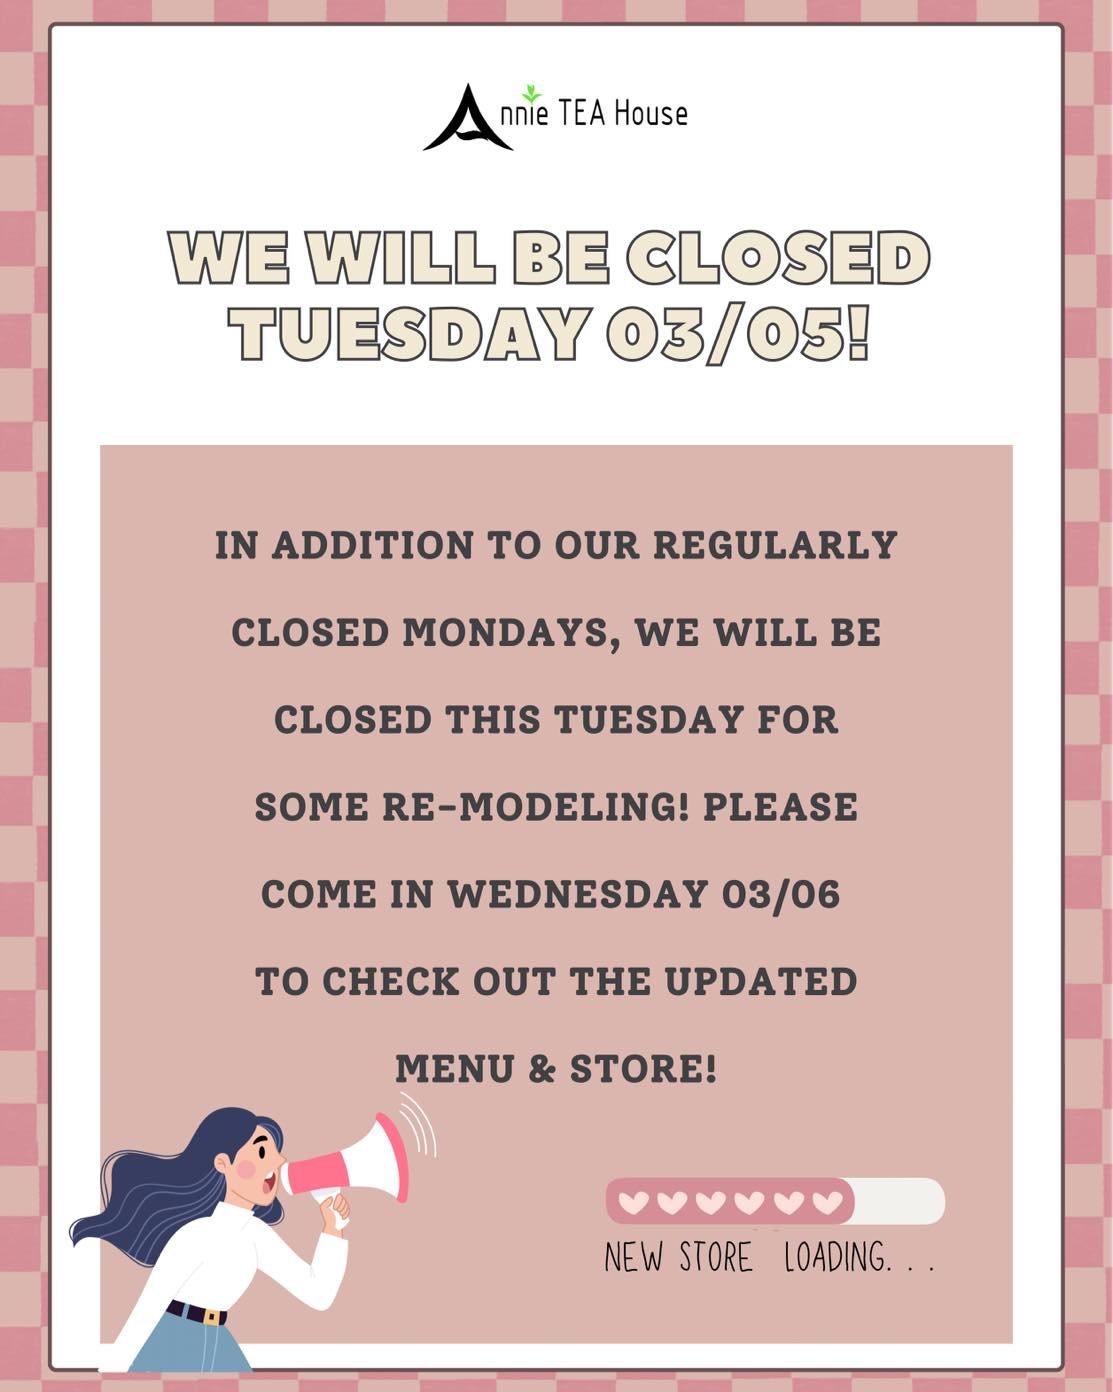 📣 &bull; Unfortunately we will be closed this Tuesday, but please come check out the updated menu &amp; store on Wednesday! 🧋🌼✨